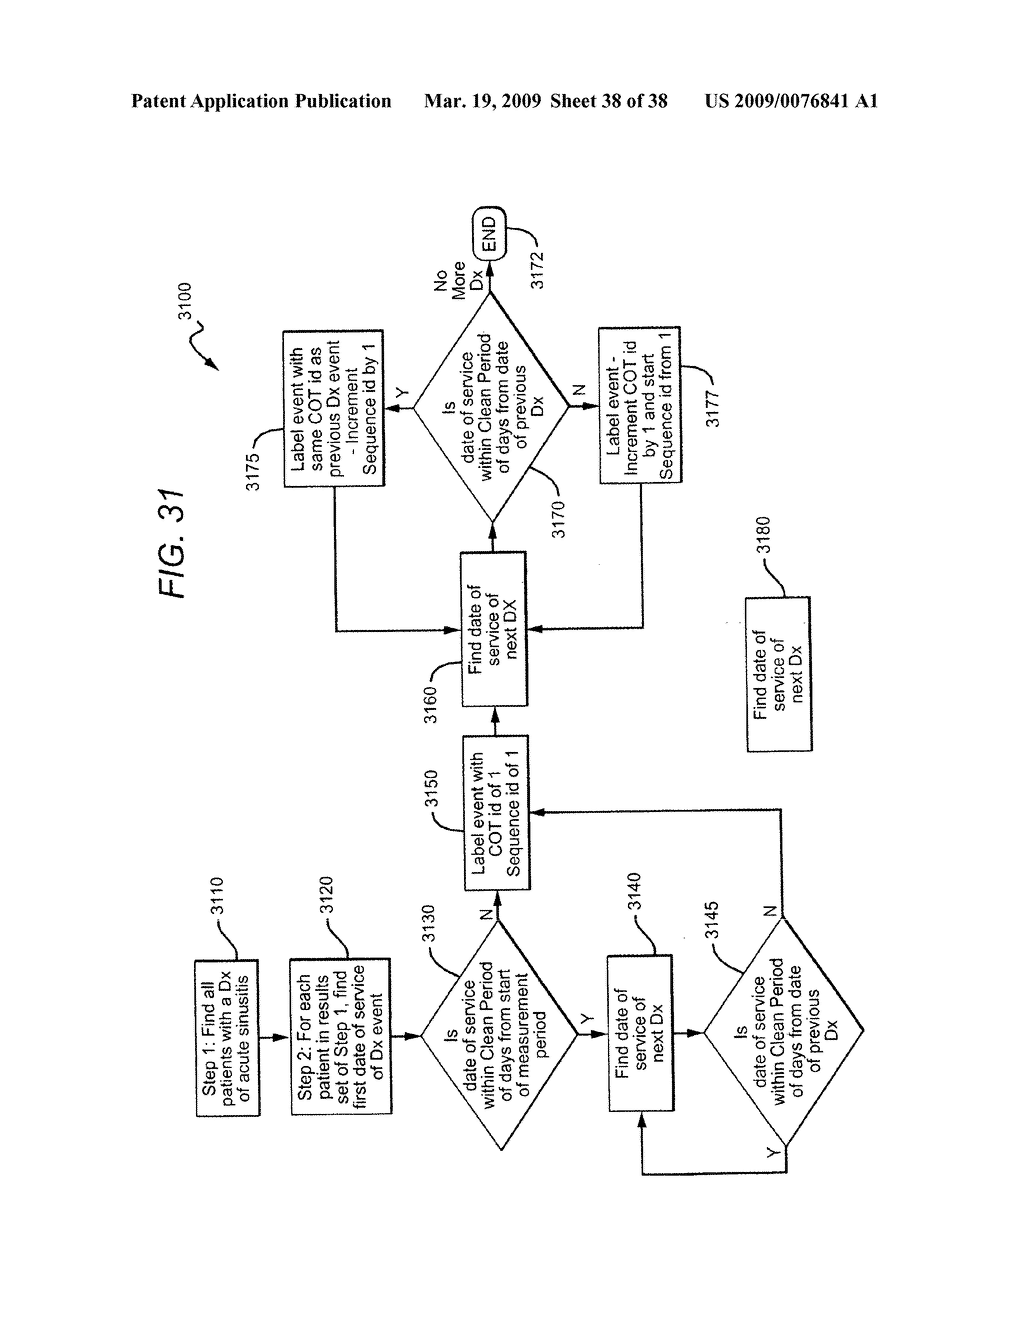 RULES-BASED SOFTWARE AND METHODS FOR HEALTH CARE MEASUREMENT APPLICATIONS AND USES THEREOF - diagram, schematic, and image 39